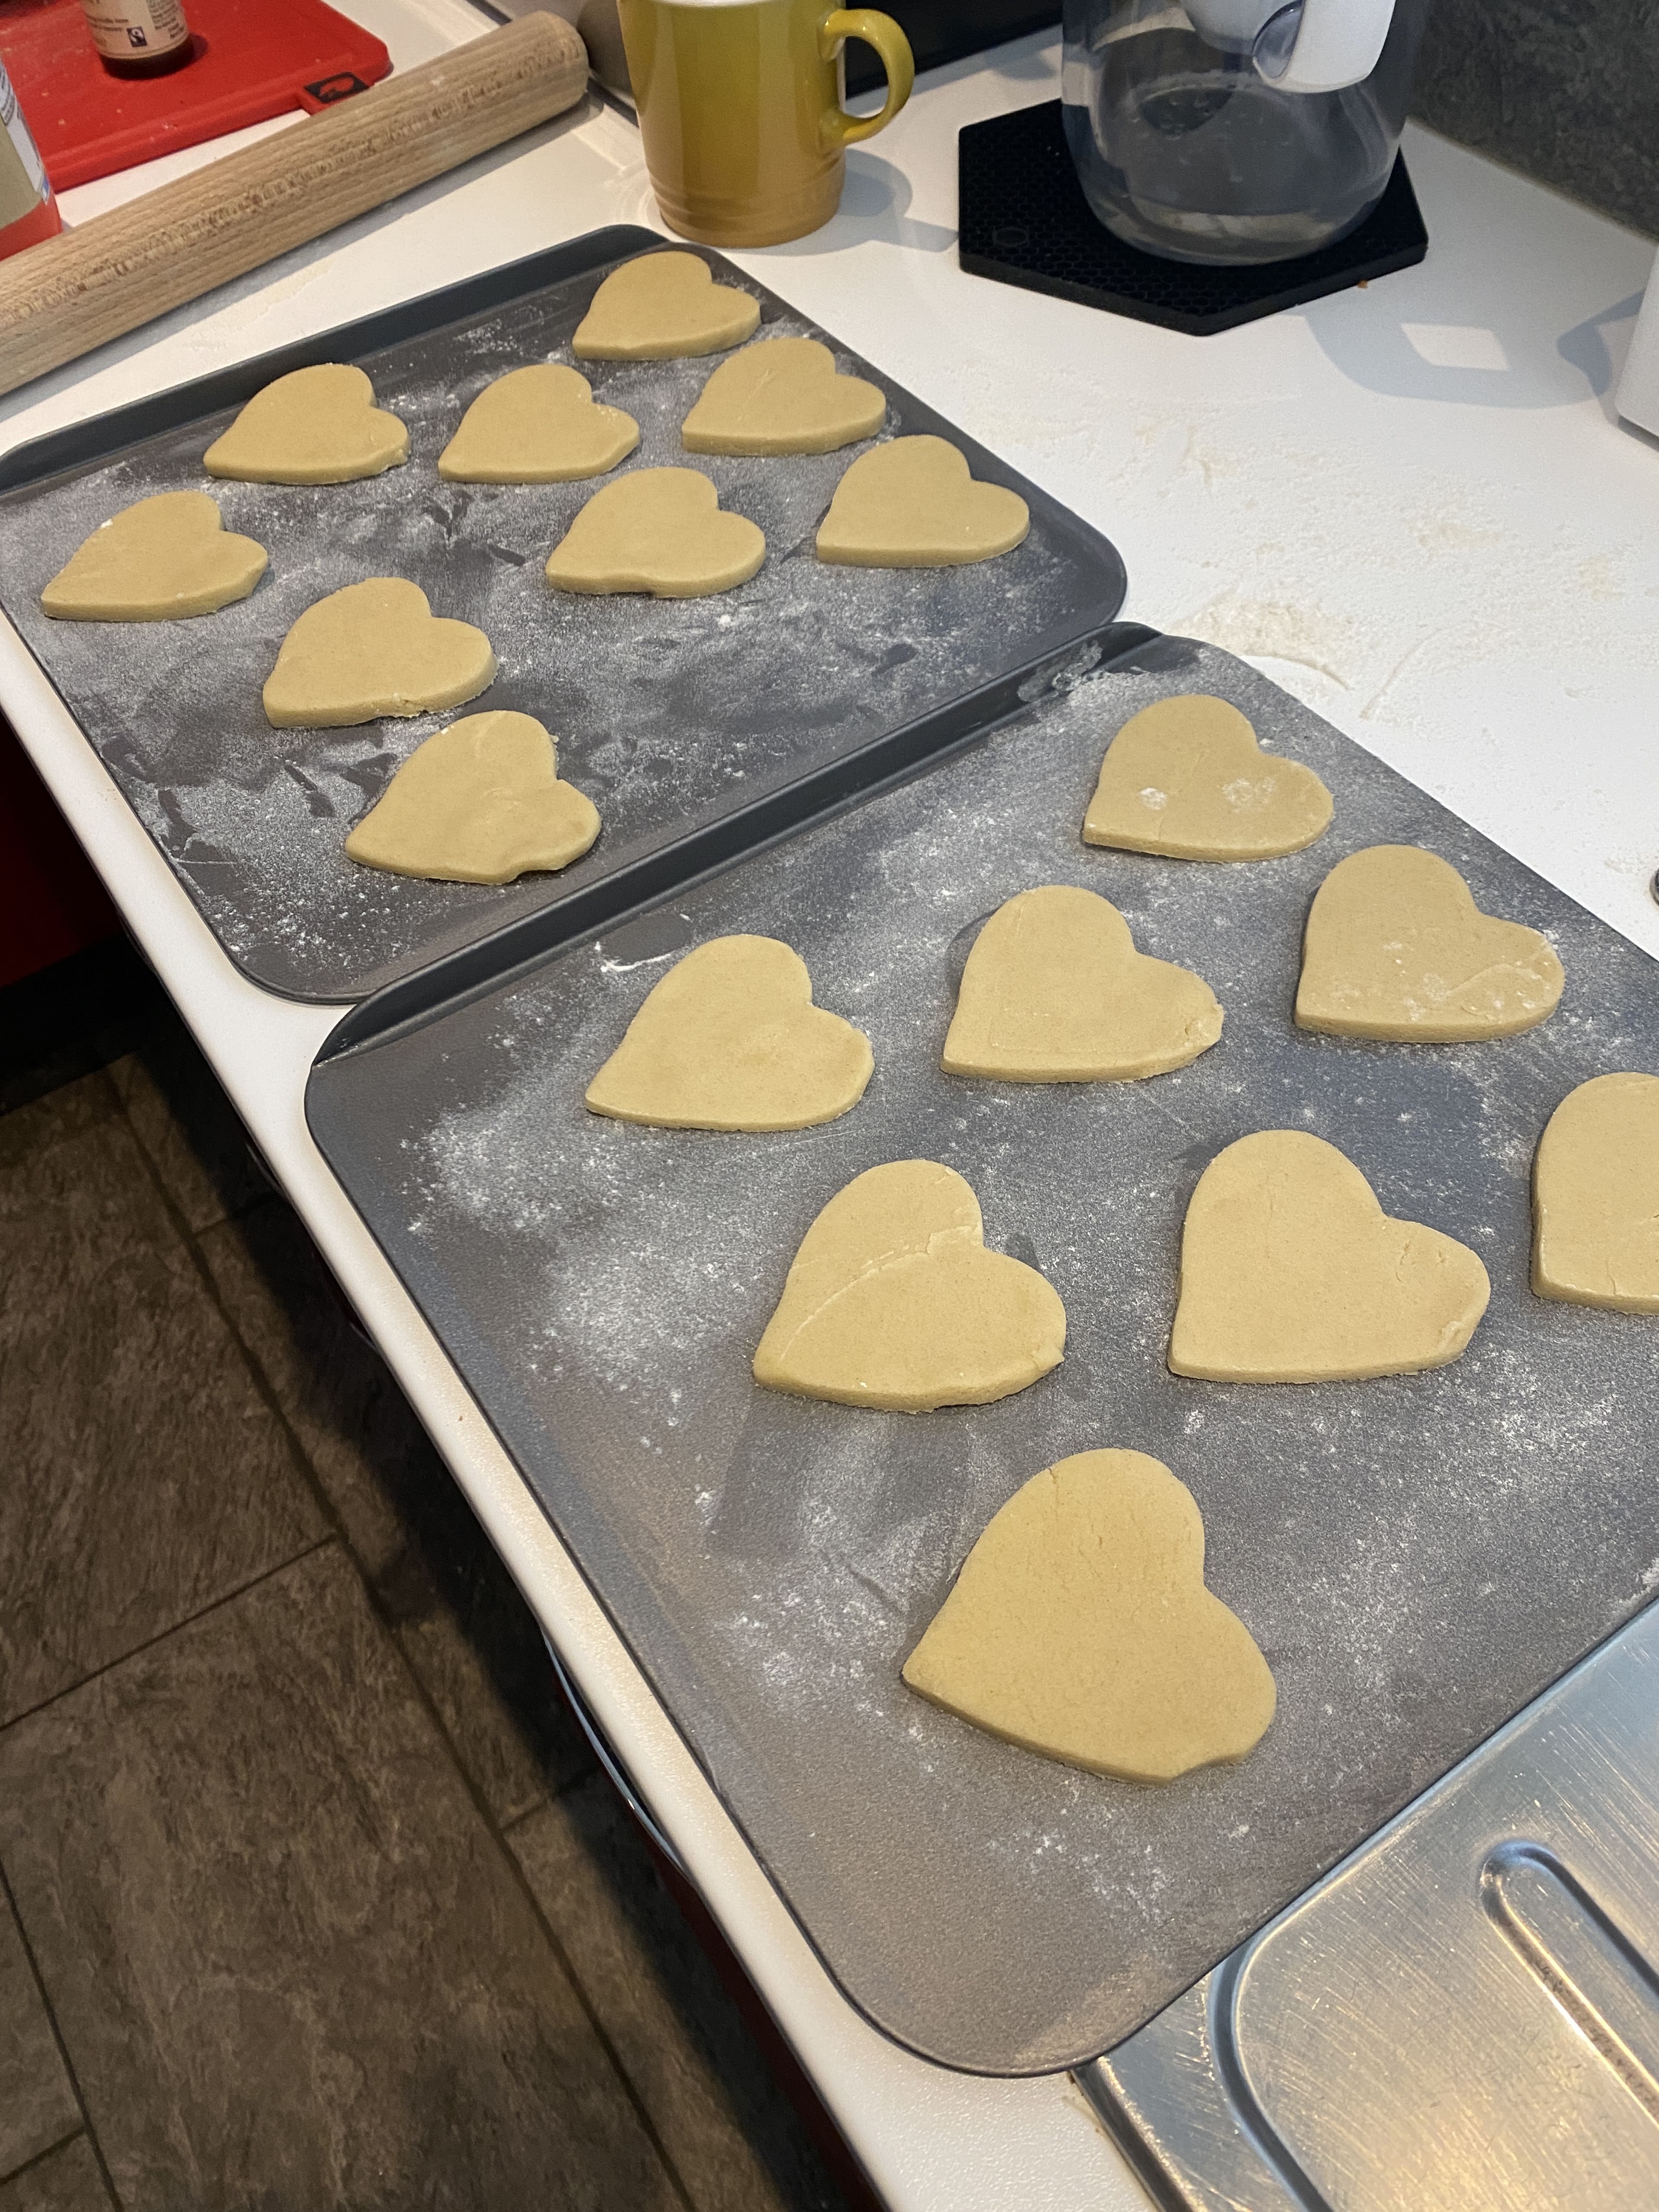 Arrange the hearts on a lightly greased baking tray (cookie sheet), with good space in between them. I used two trays to accommodate 17 biscuits. Bake in a preheated oven, 180C/350F/Gas Mark 4 for 15-20 minutes until the hearts are a light golden colour.